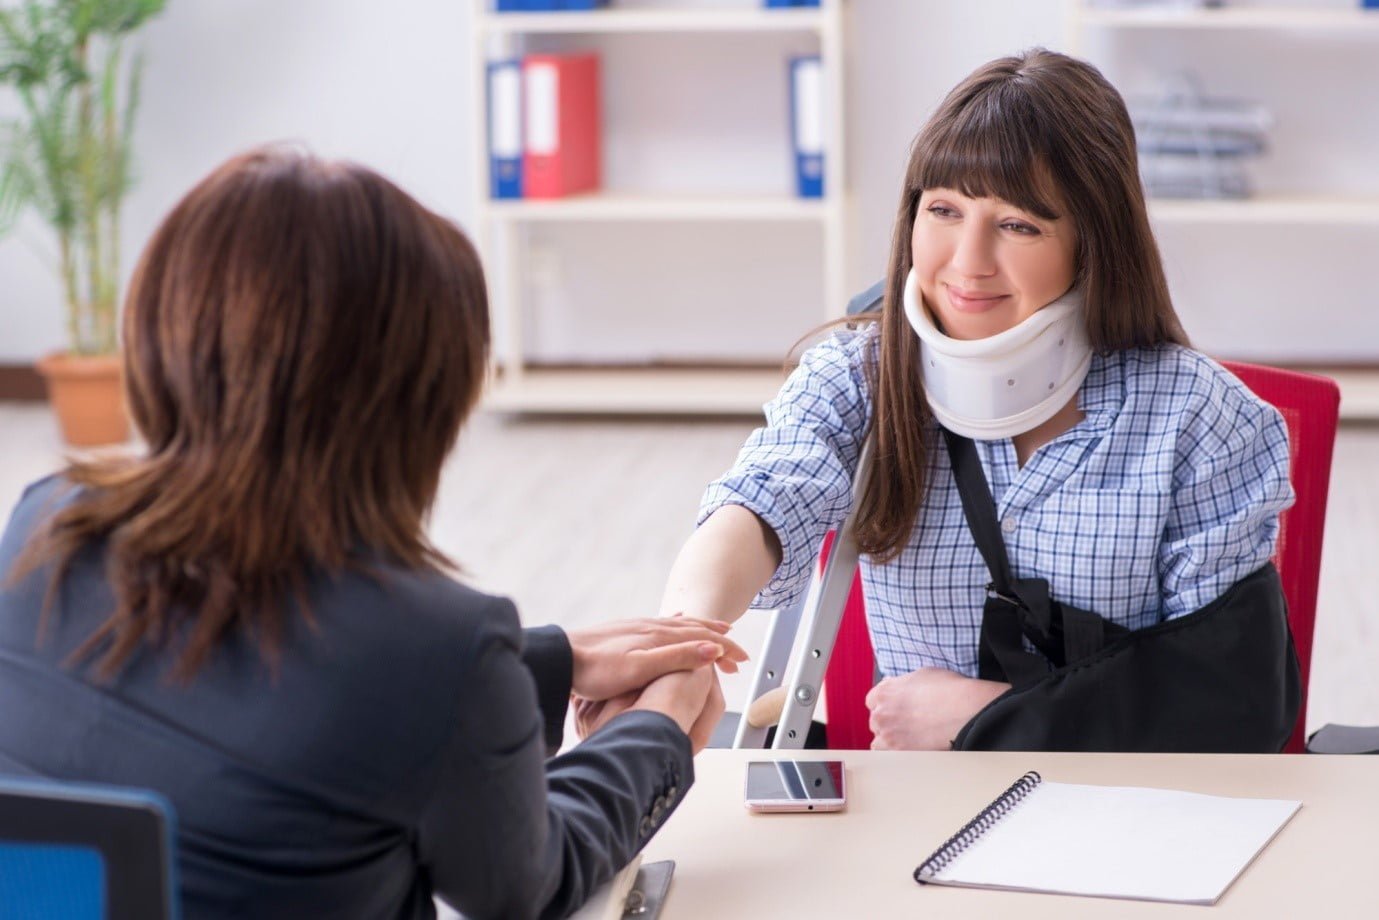 What To Look For In A Workers' Compensation Lawyer